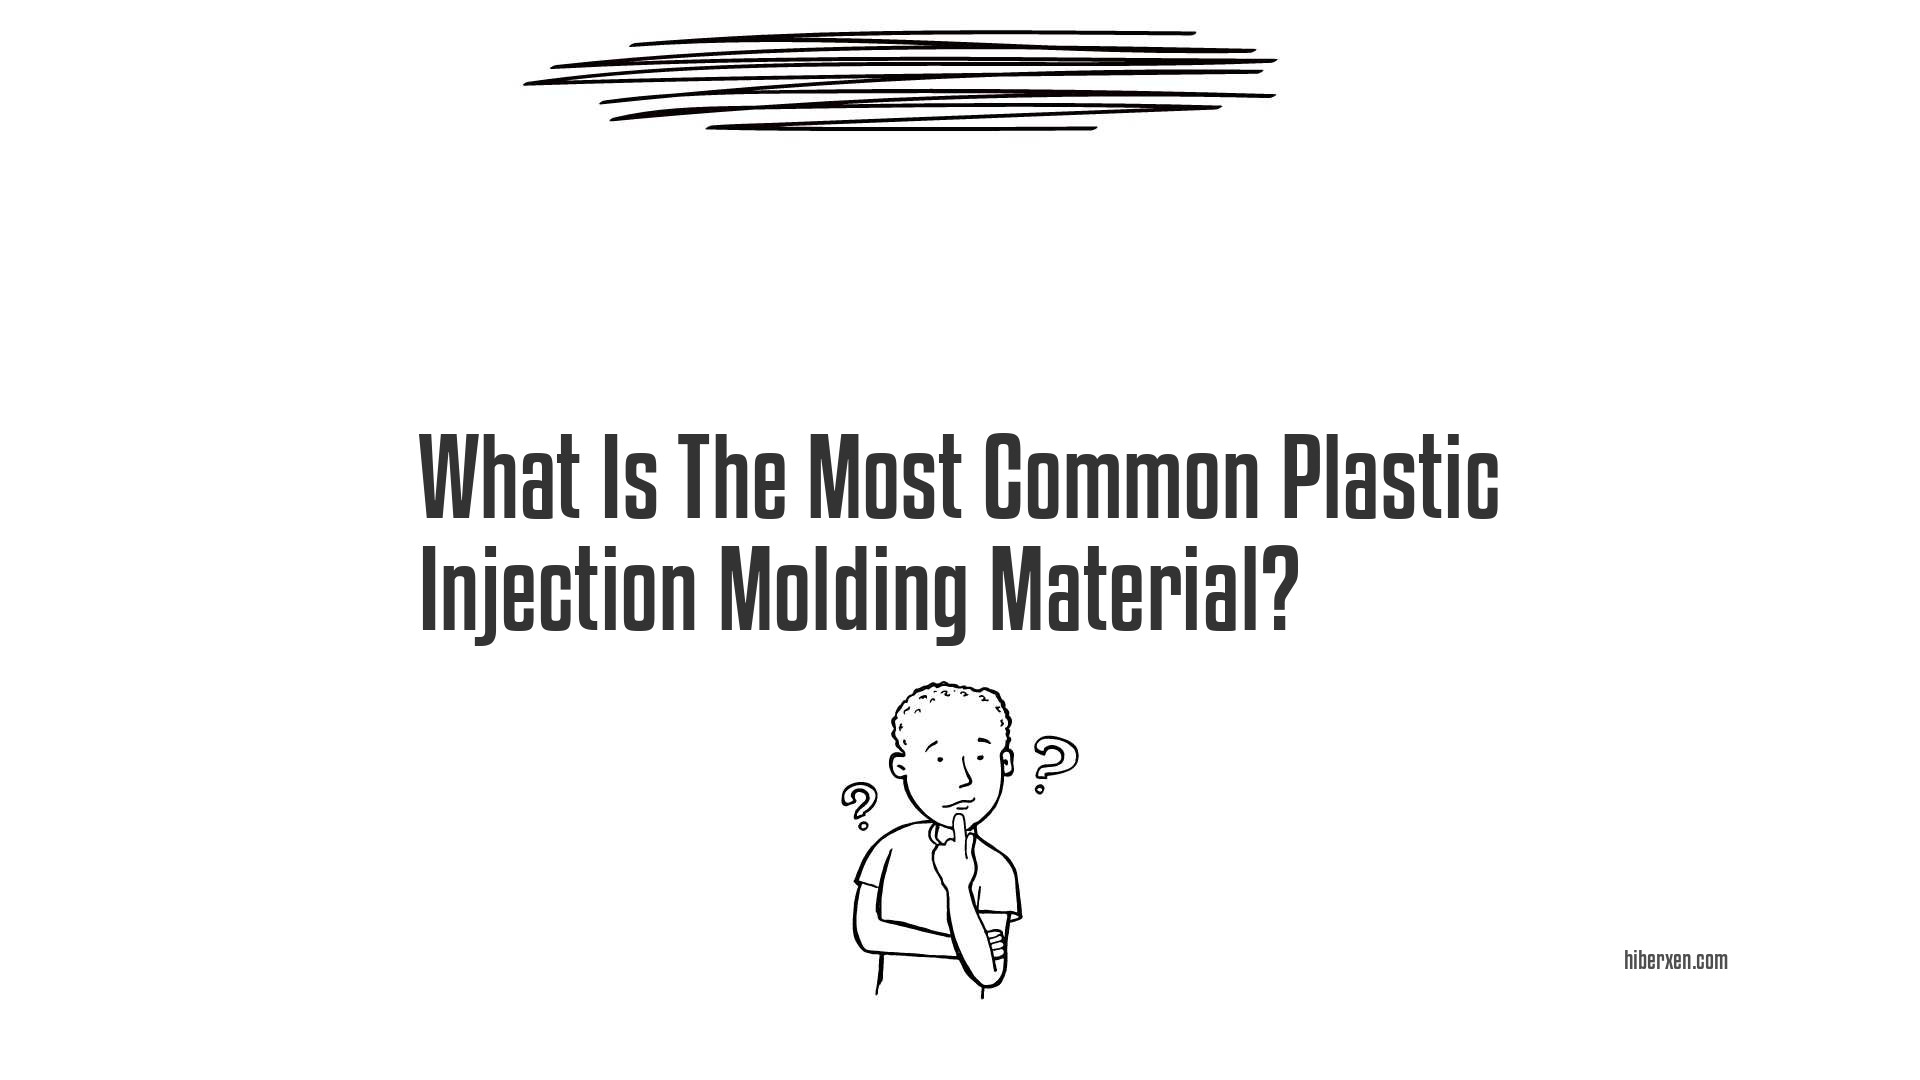 What Is The Most Common Plastic Injection Molding Material?